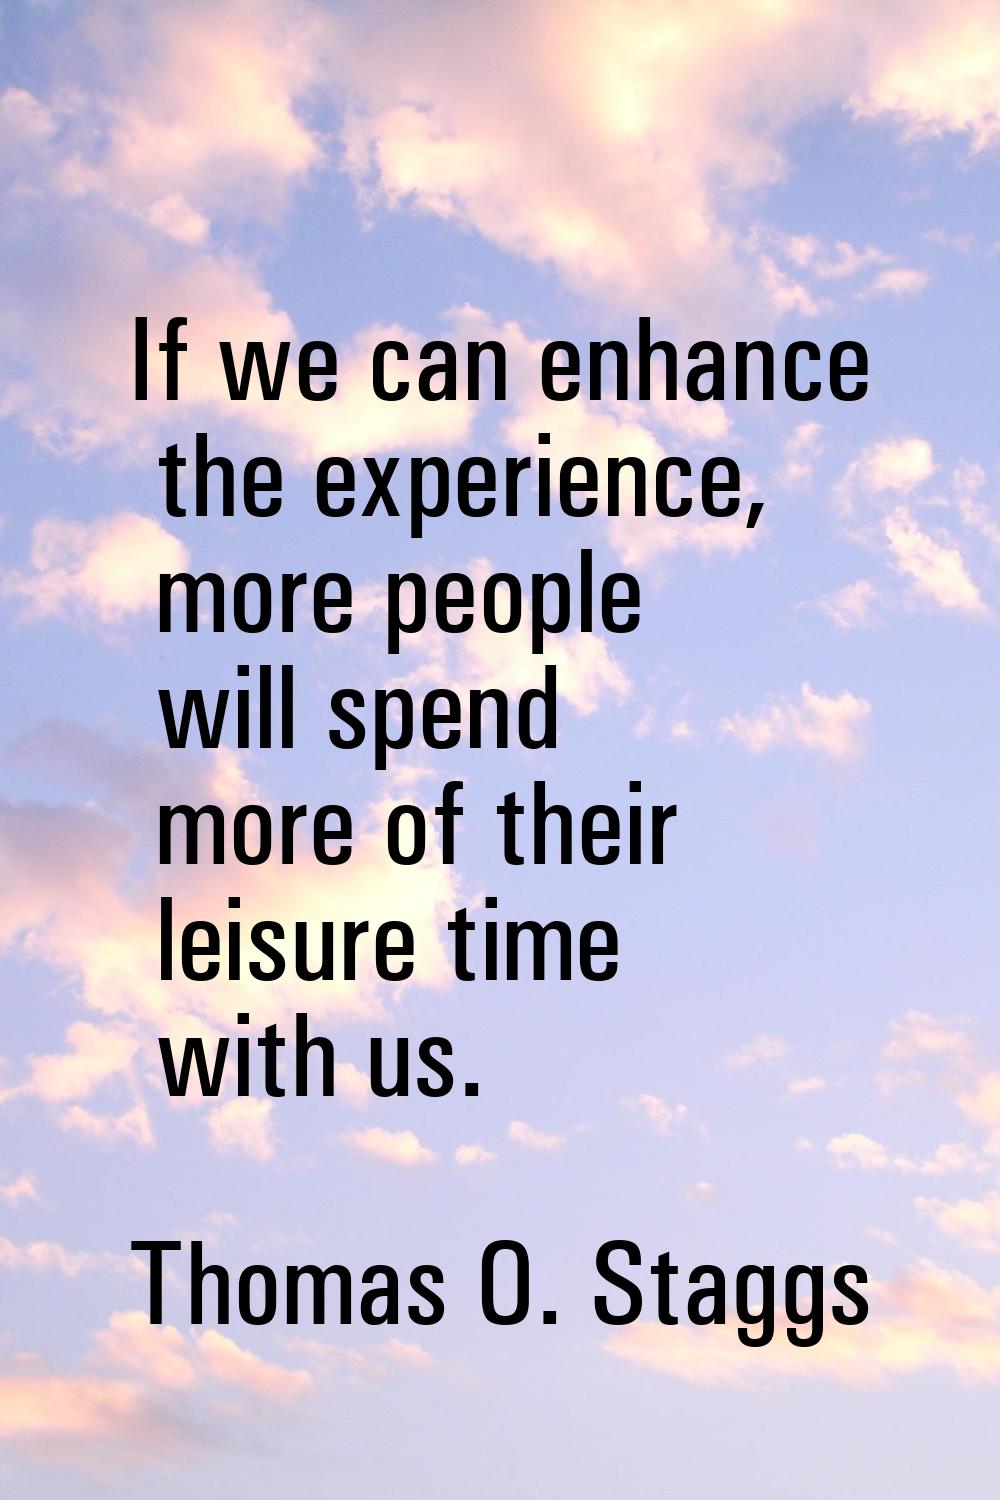 If we can enhance the experience, more people will spend more of their leisure time with us.